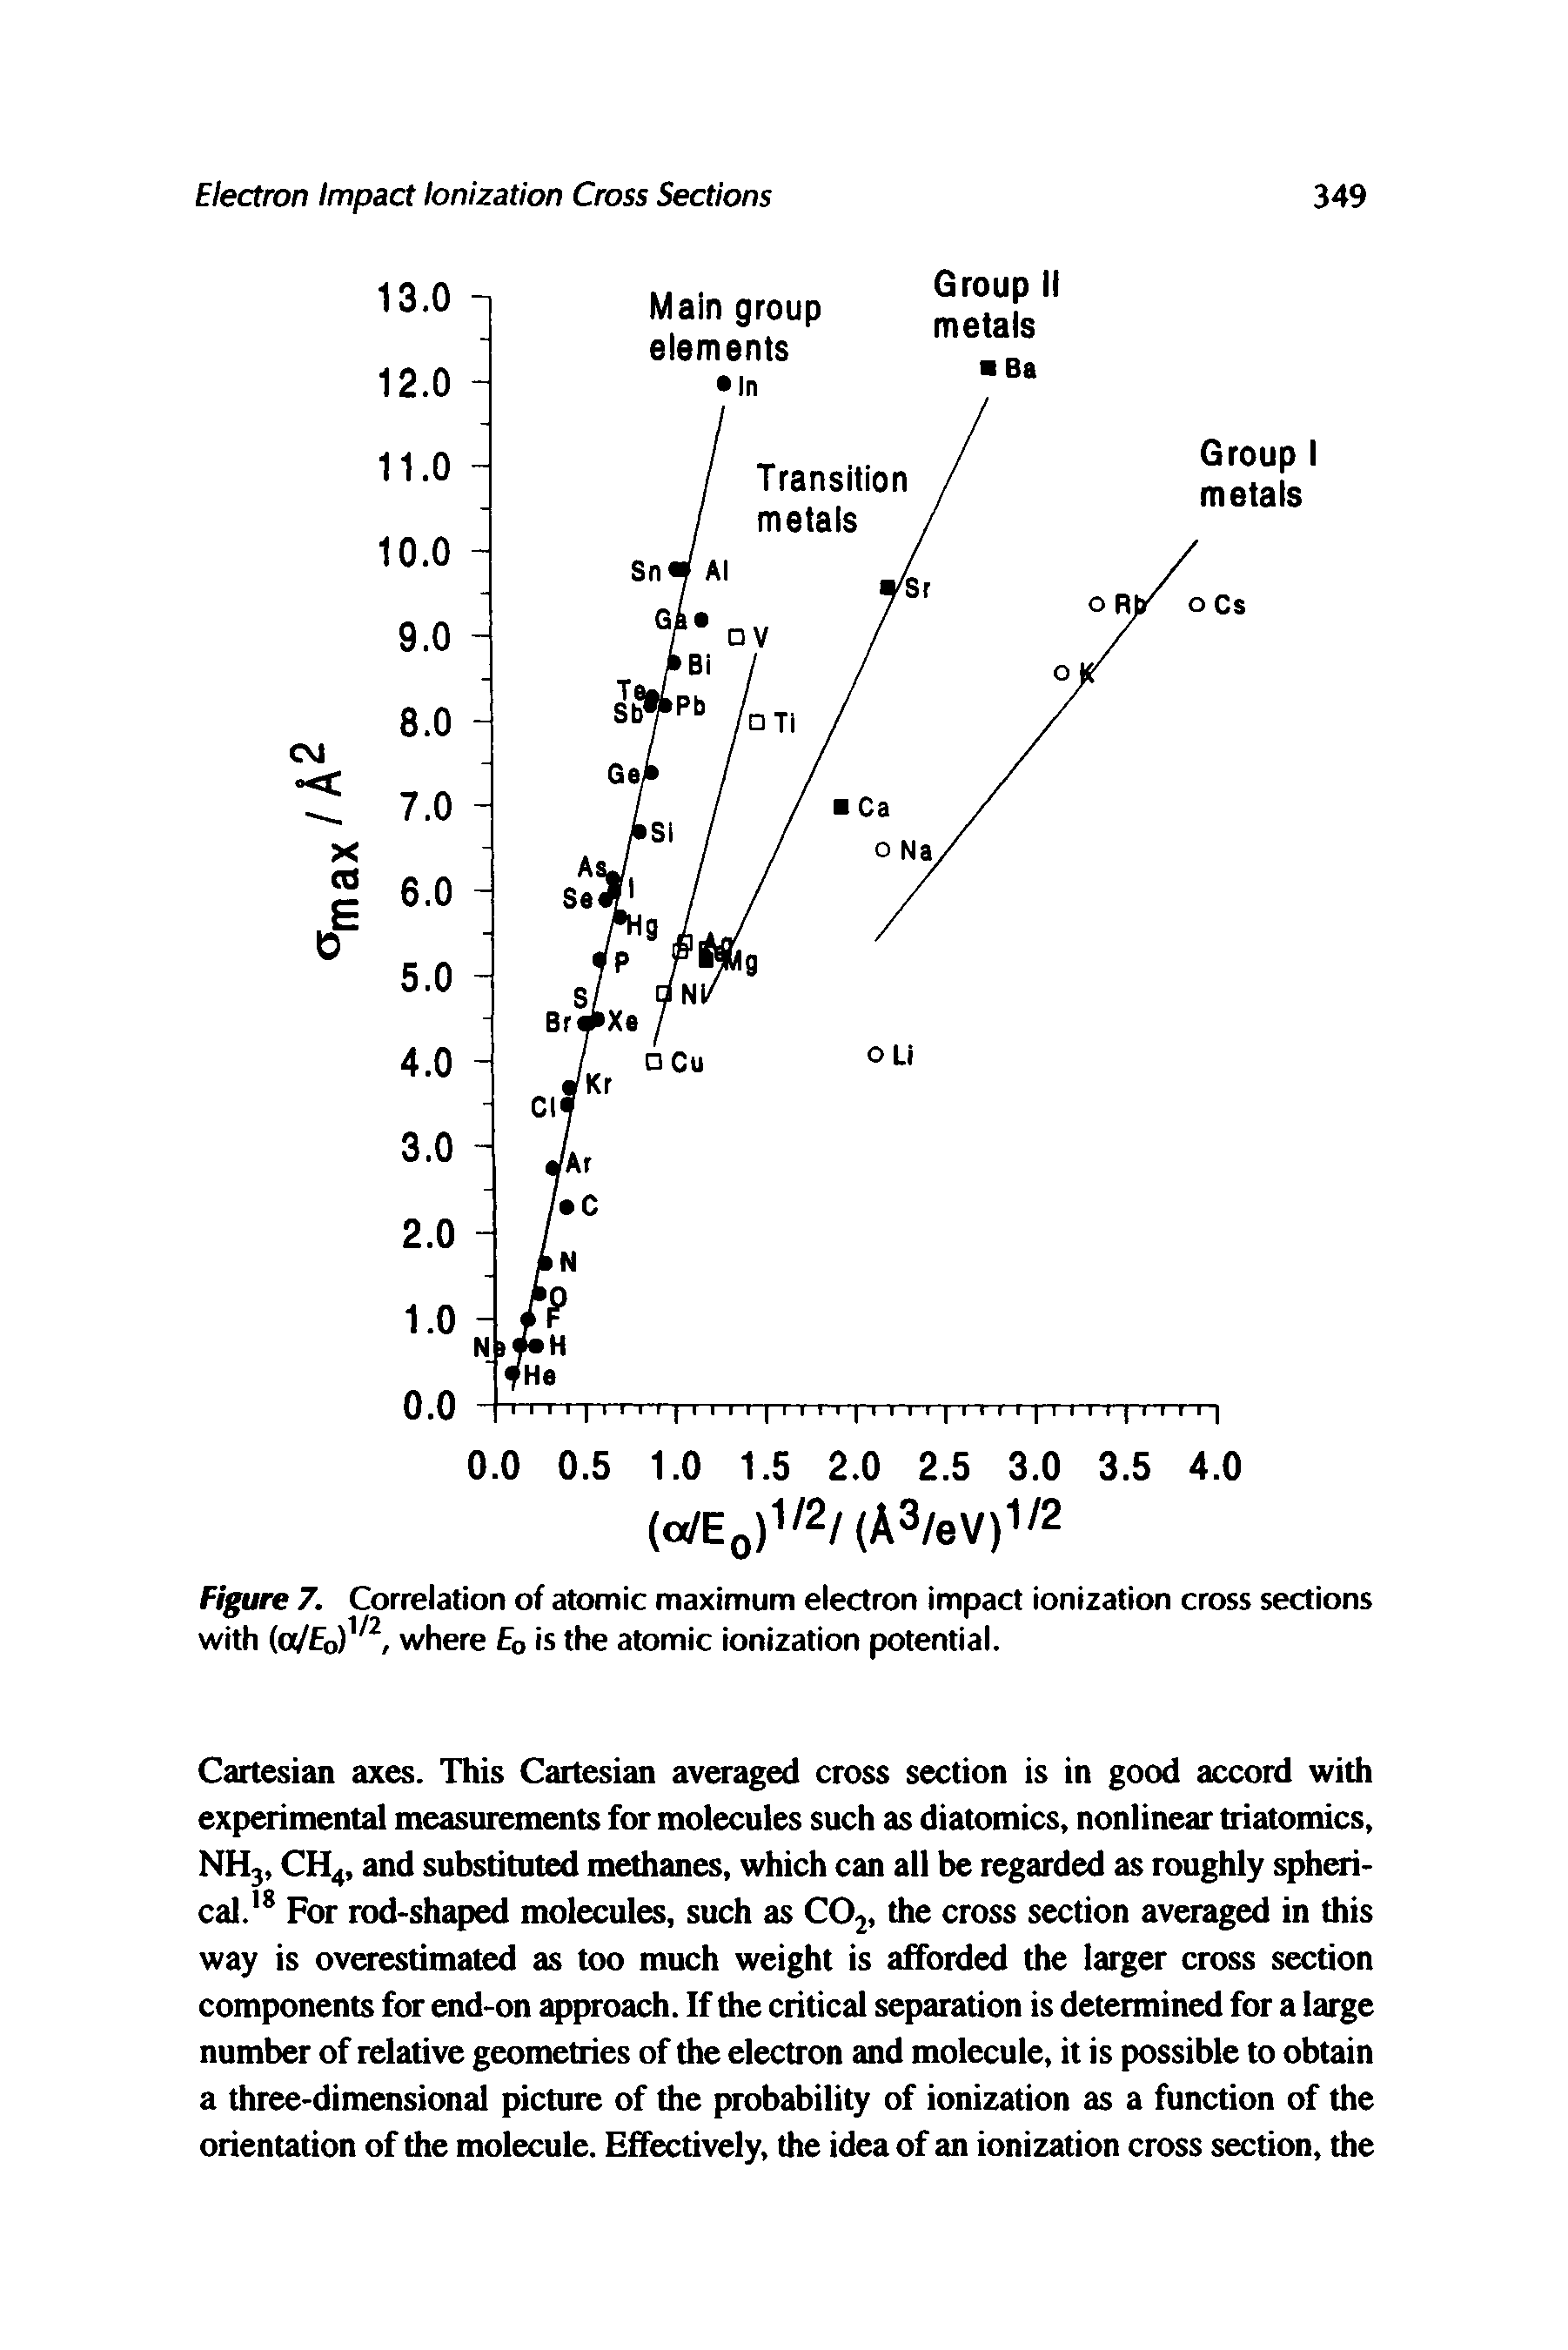 Figure 7. Correlation of atomic maximum electron impact ionization cross sections with (a/ 0)1/2/ where E0 is the atomic ionization potential.